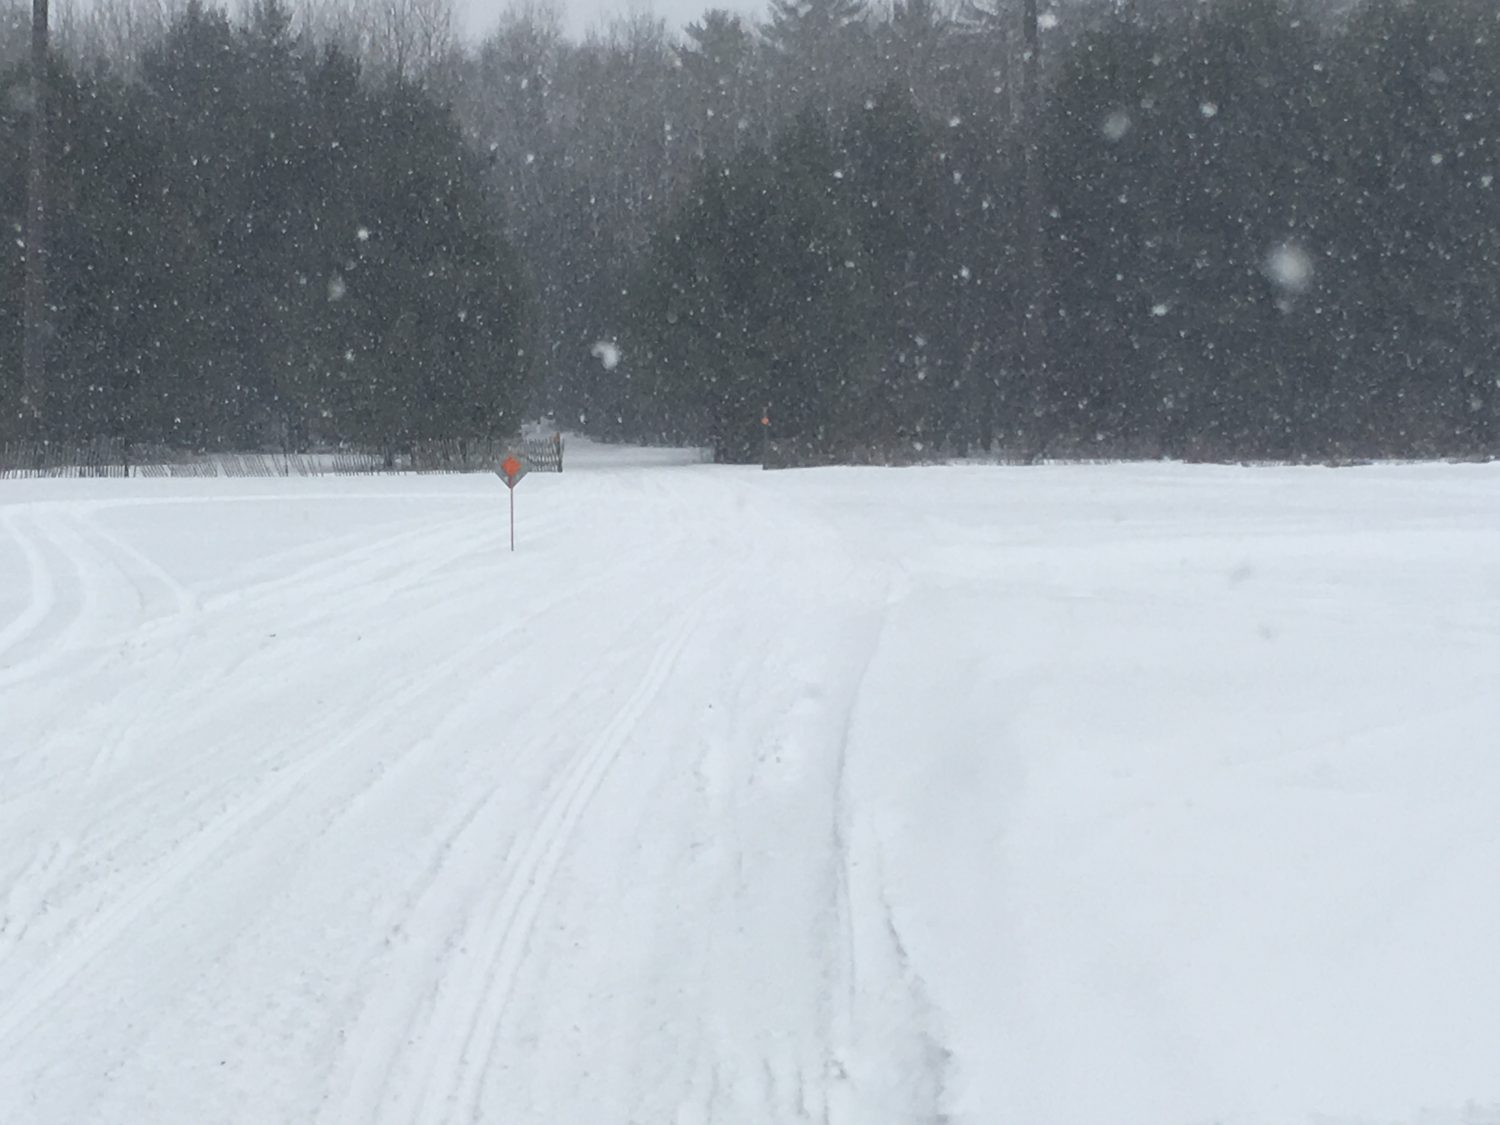 Portion of county snowmobile trails open as of Friday morning